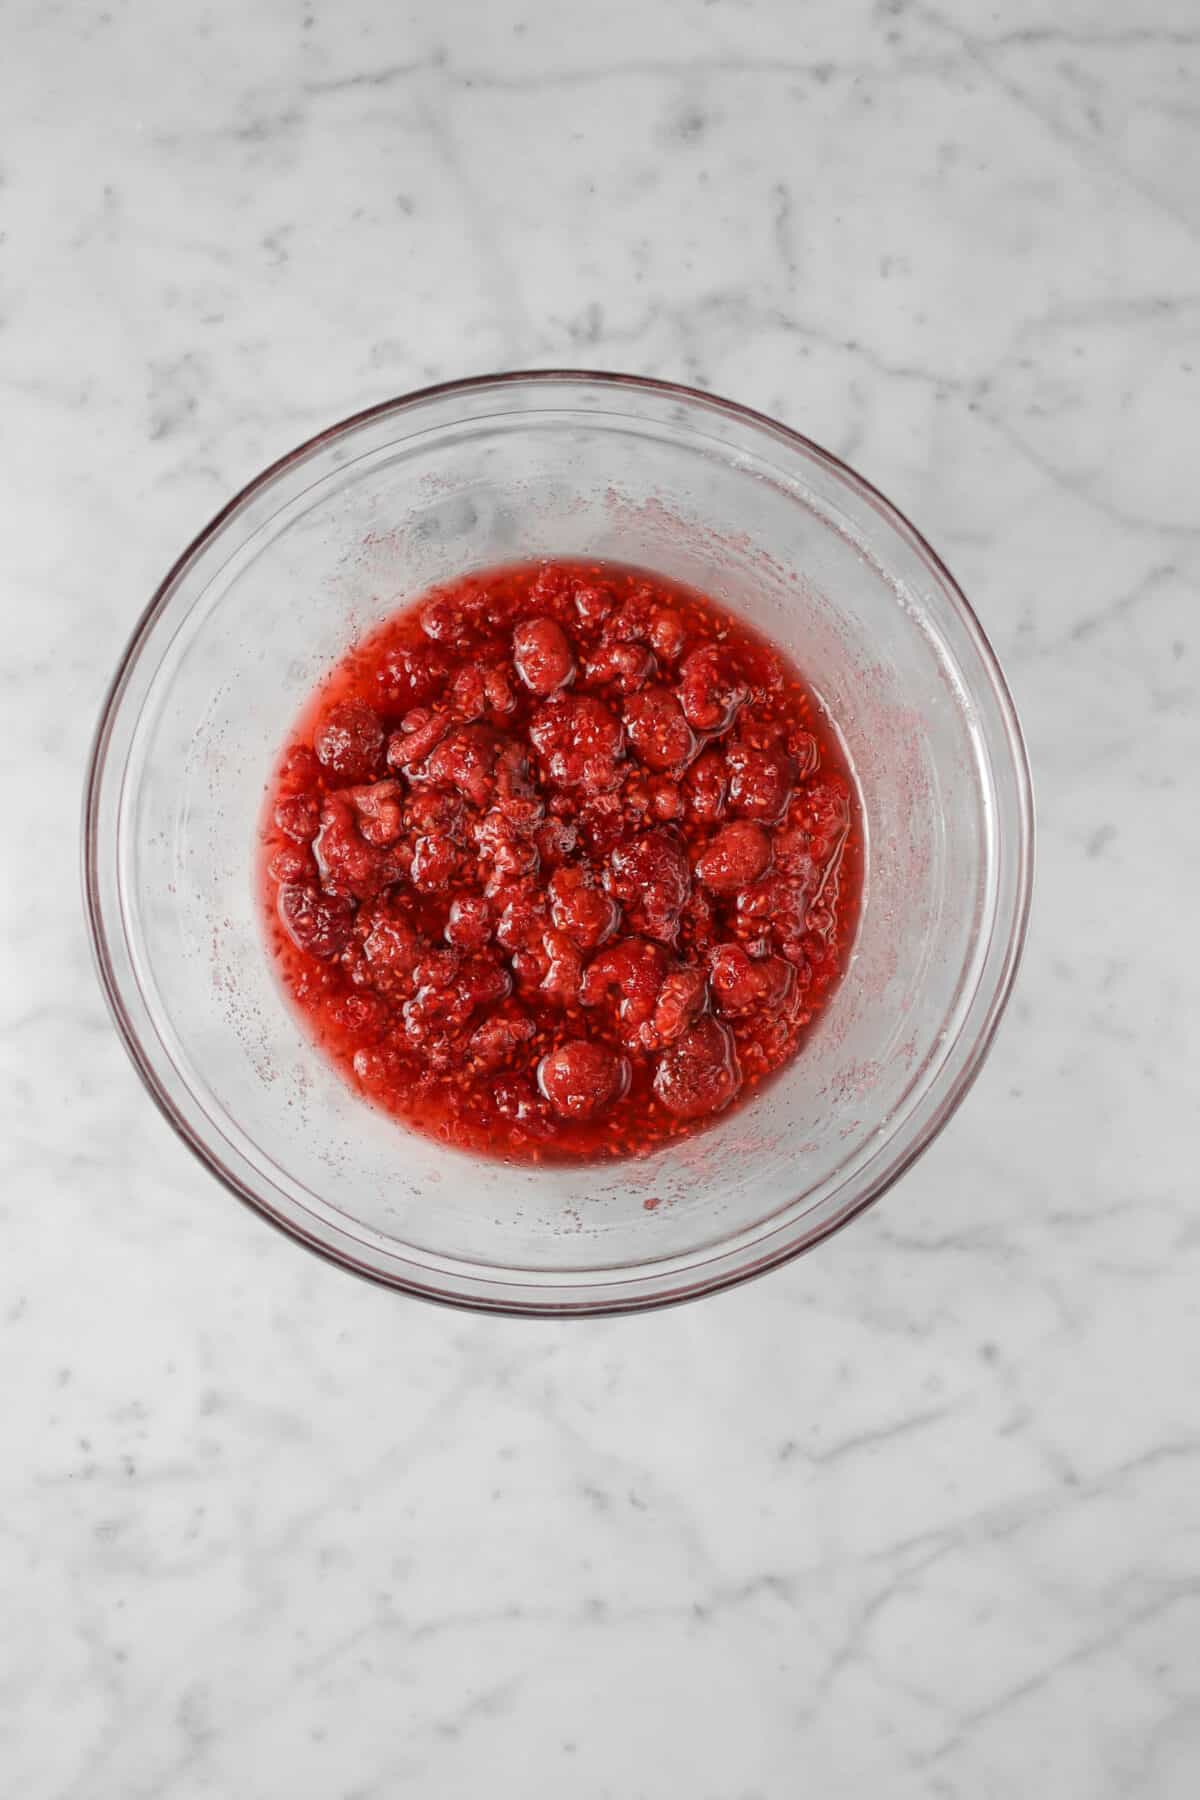 macerated raspberries in a glass bowl